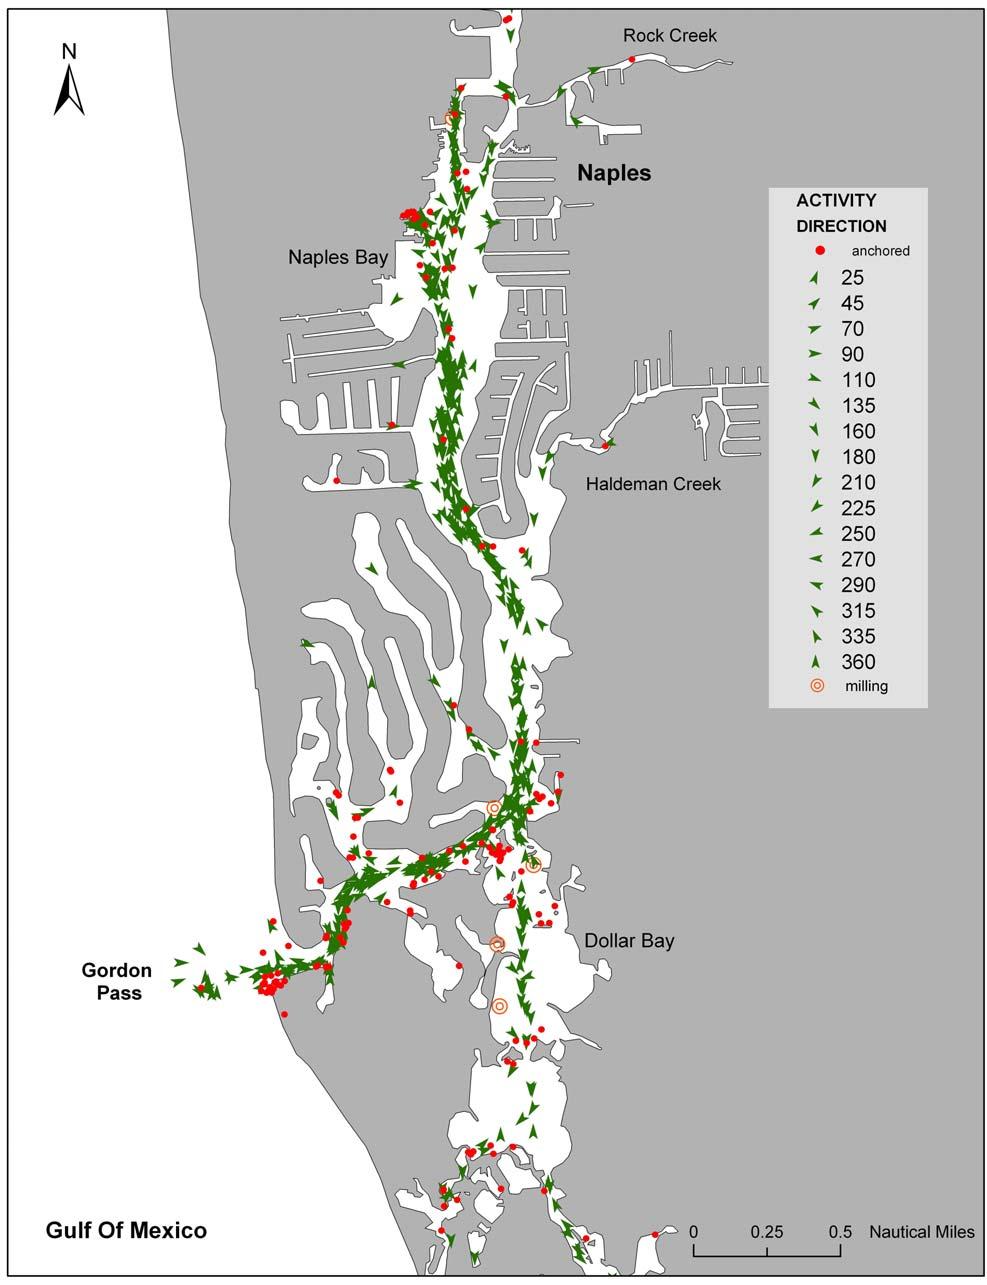 Figure 7. Distribution of moving and stationary vessels near Naples Bay and Gordon Pass.